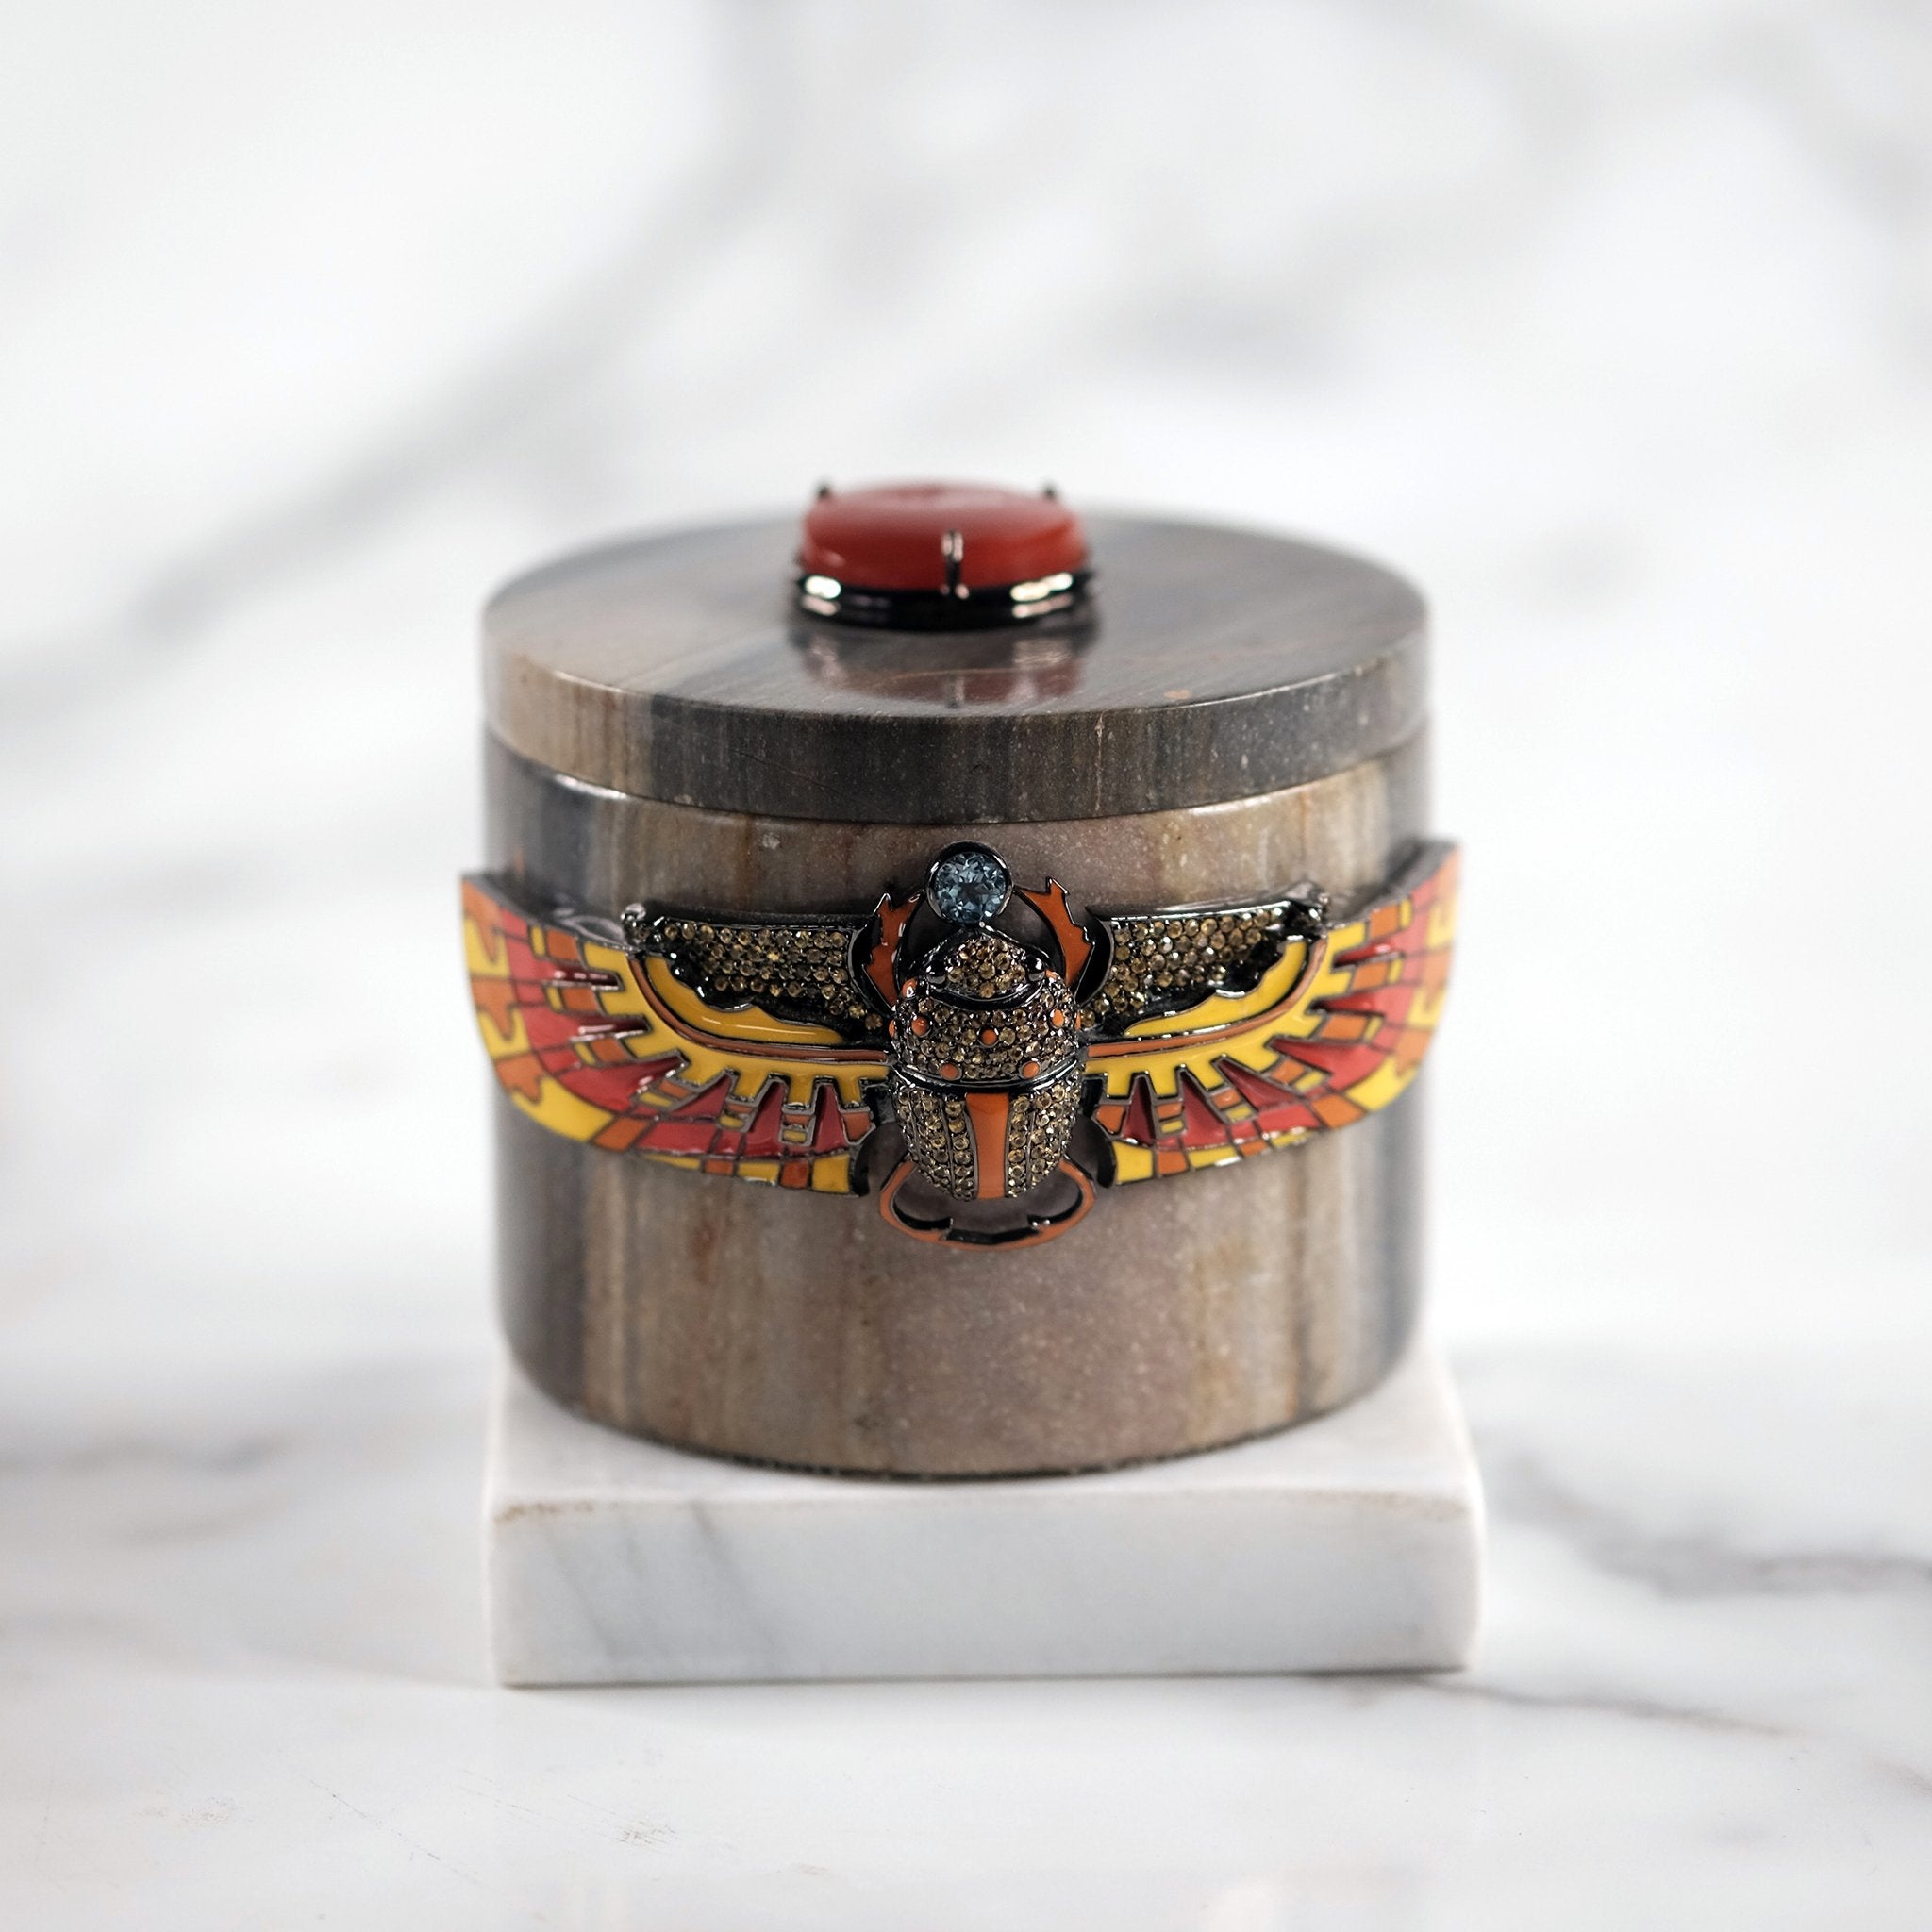 Turned Jasper Box, with Winged Scarab in Red & Yellow Enamel, Mixed Sapphires & Blue Topaz, and a Carneilan Drusy on Lid